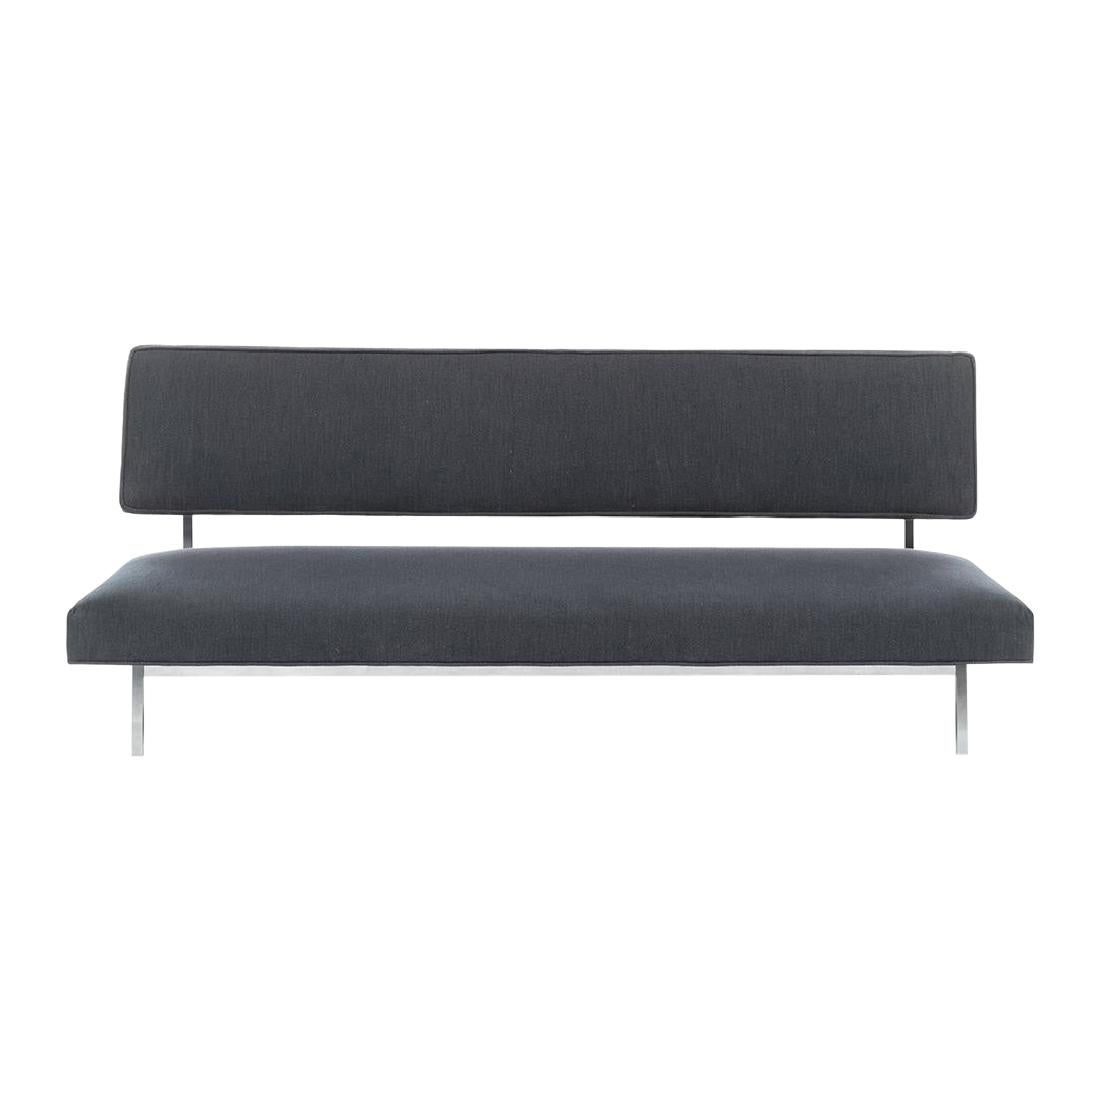 Florence Knoll "Parallel Bar" Convertible Sofa Mid-Century Modern Daybed Lounge 